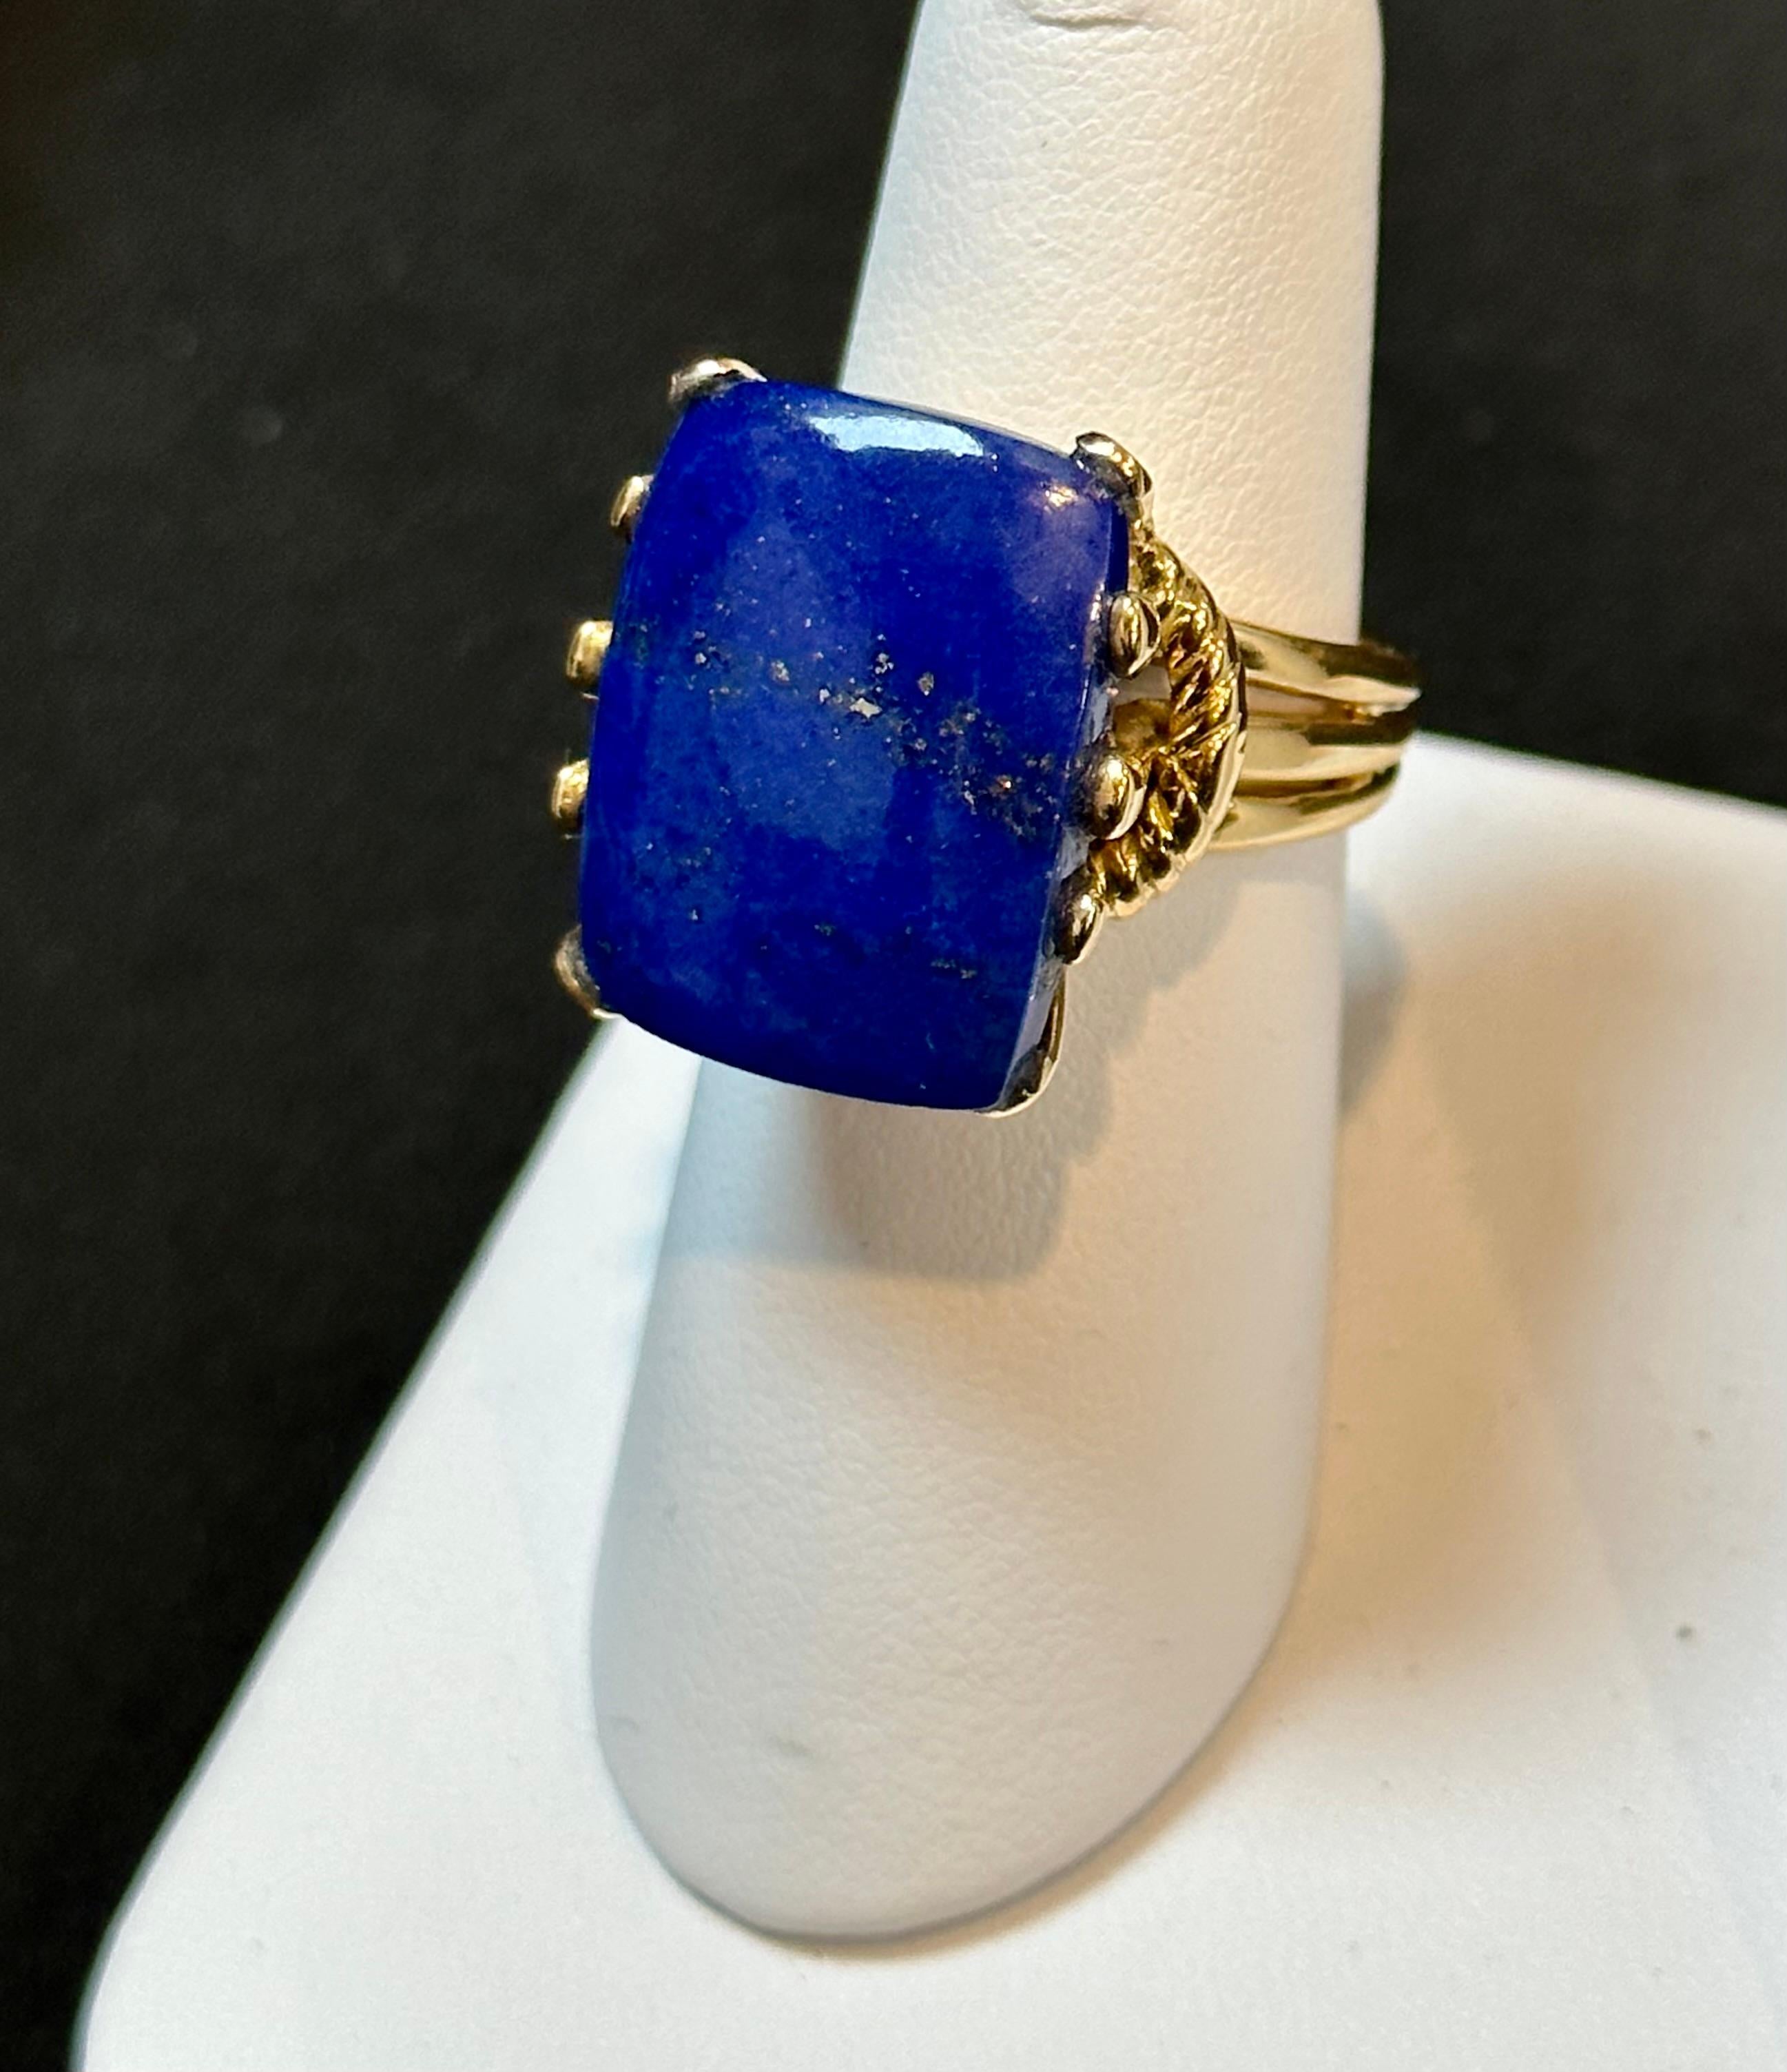 Introducing our exquisite Estate Lapis Lazuli Ring, crafted in 14 Karat Yellow Gold. This stunning ring features a magnificent 15 carat, high-quality, natural Lapis Lazuli gemstone in an Emerald cut shape. The color, cut, and clarity of the stone